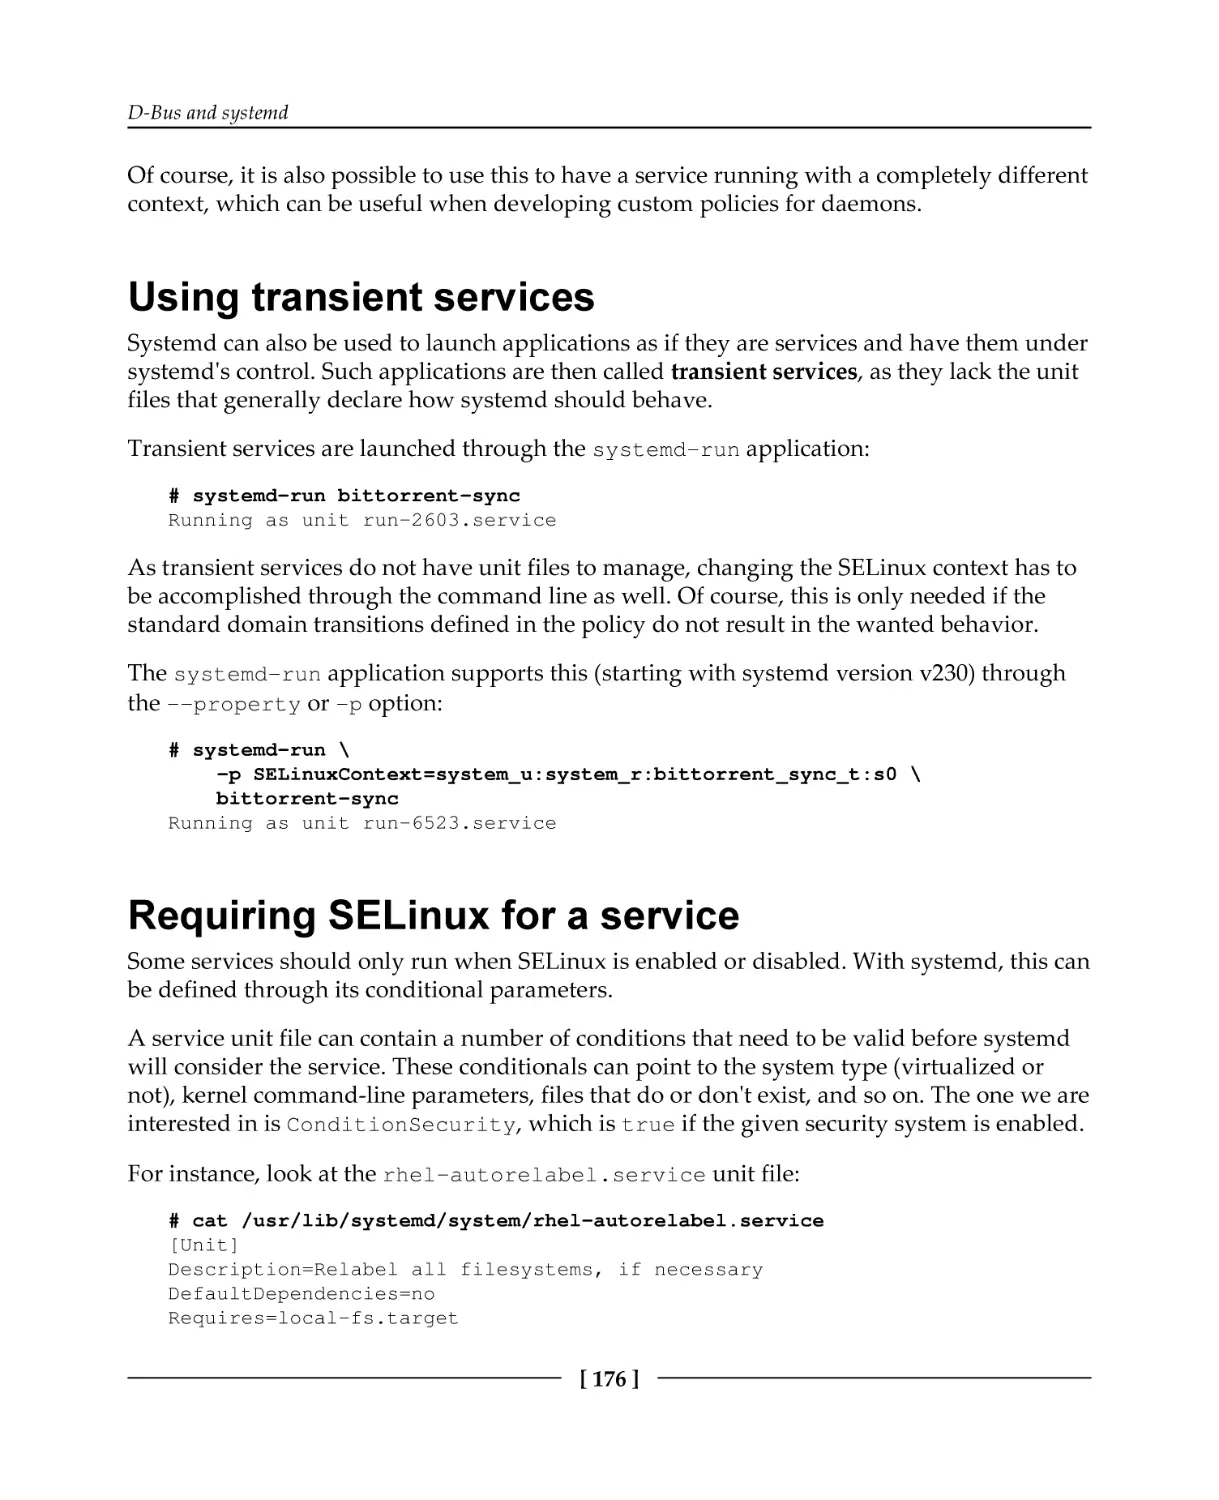 Using transient services
Requiring SELinux for a service